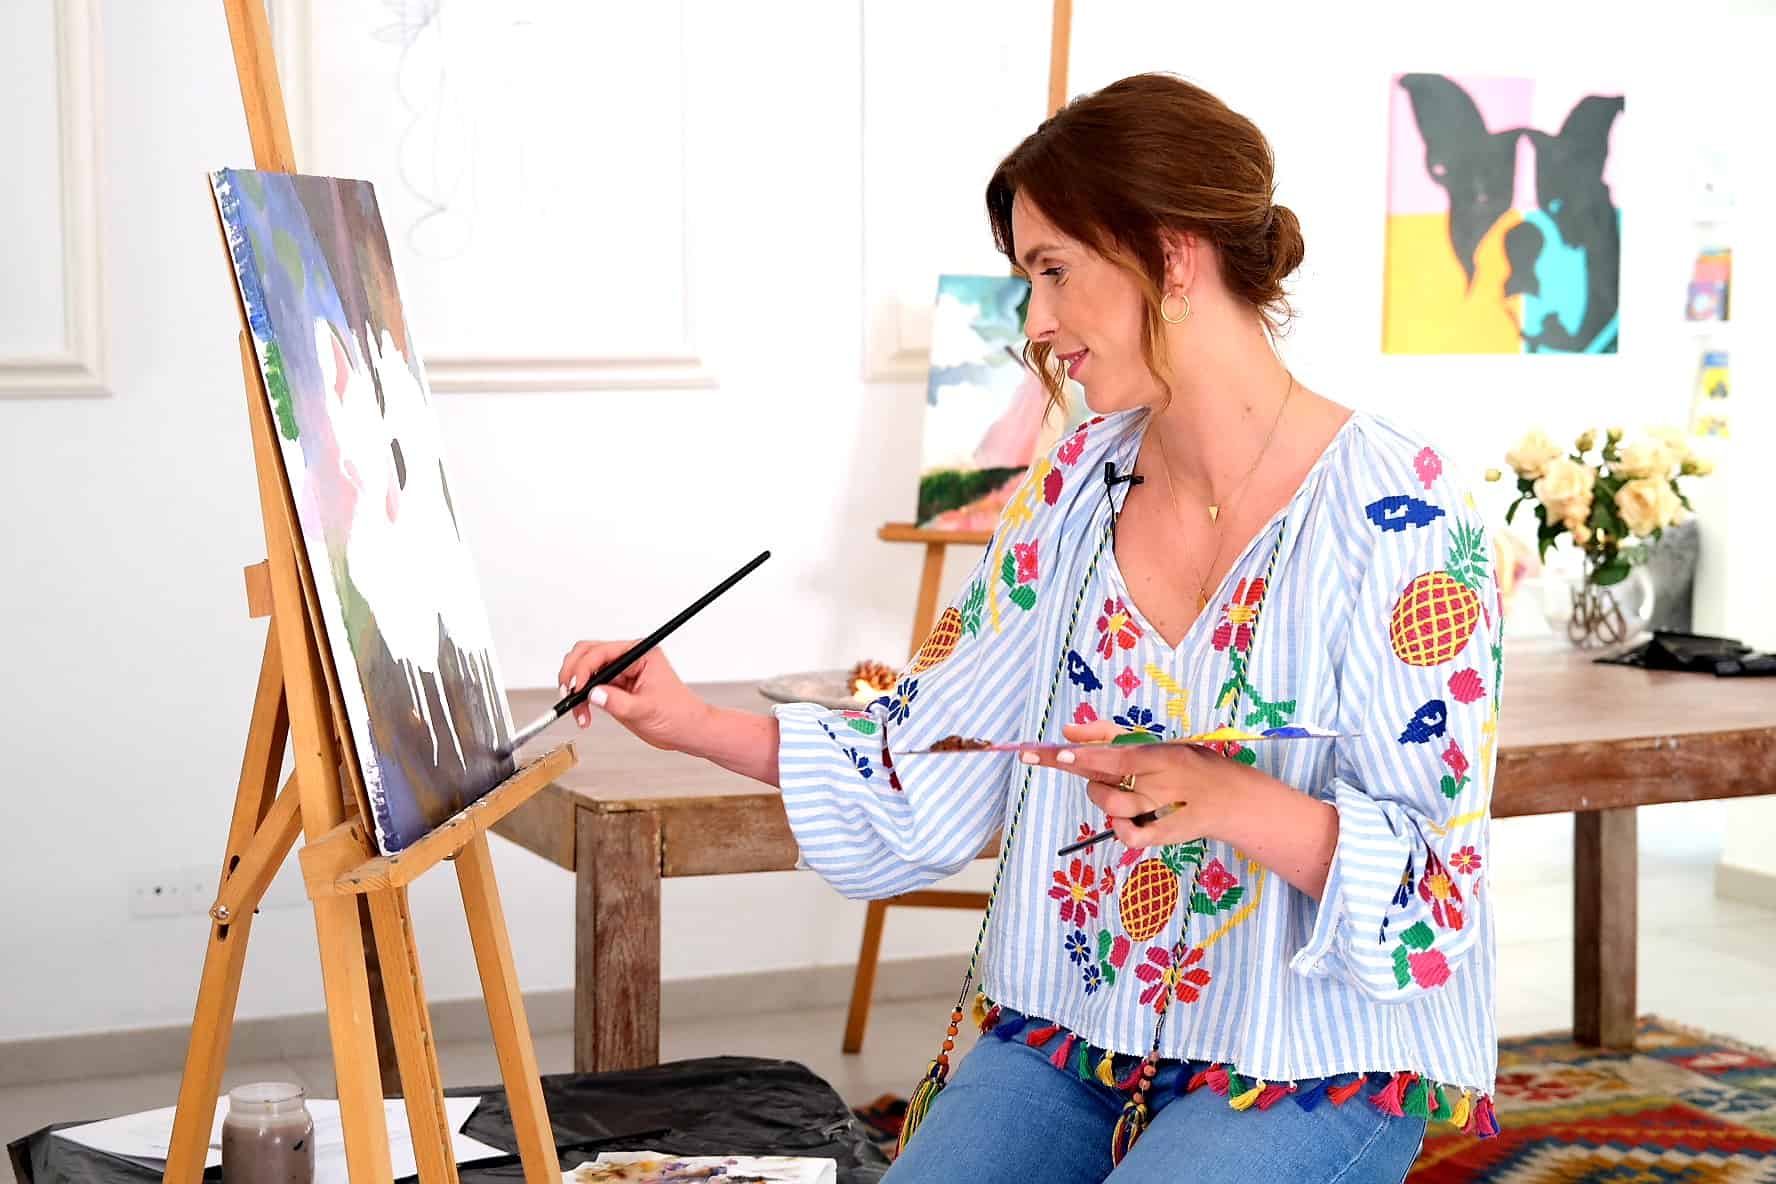 What are the top 5 benefits of painting in our lives and at home?